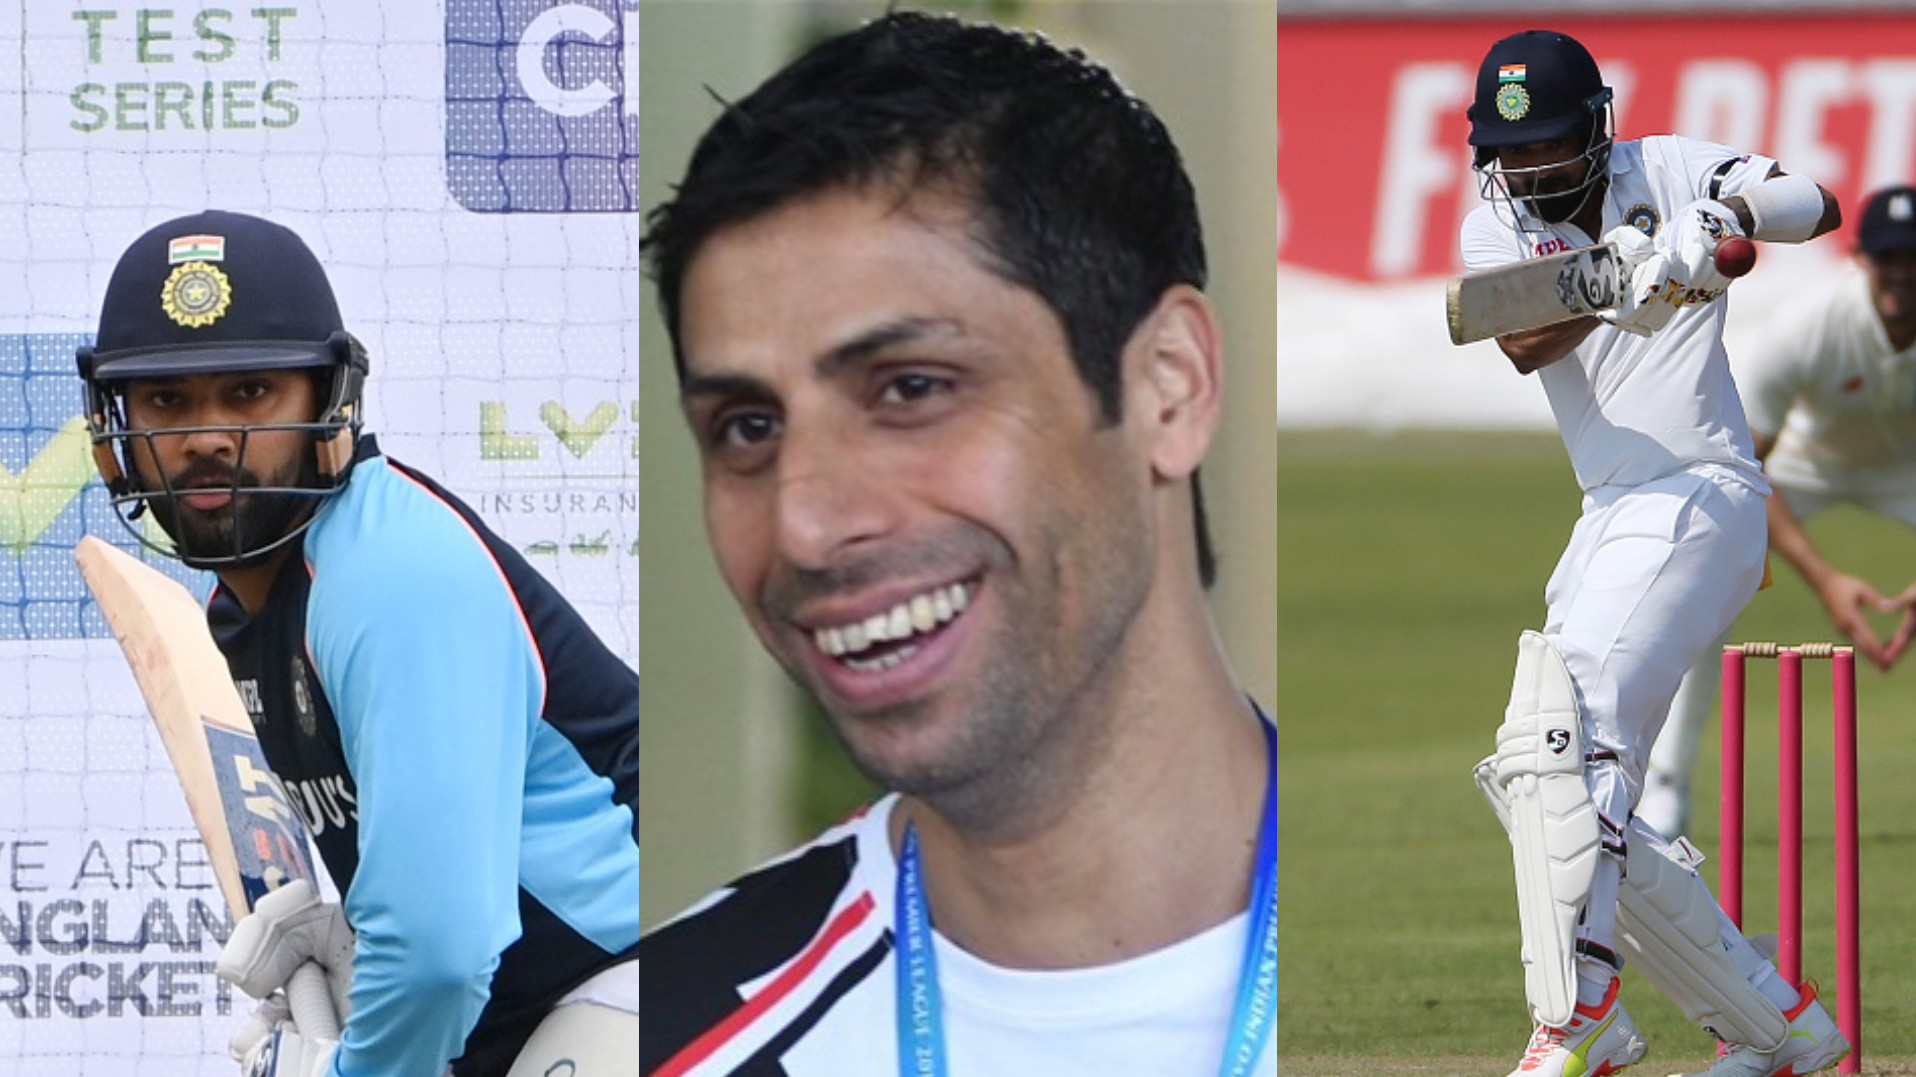 ENG v IND 2021: If Rohit Sharma has a good tour, India chances of winning will be much better- Ashish Nehra